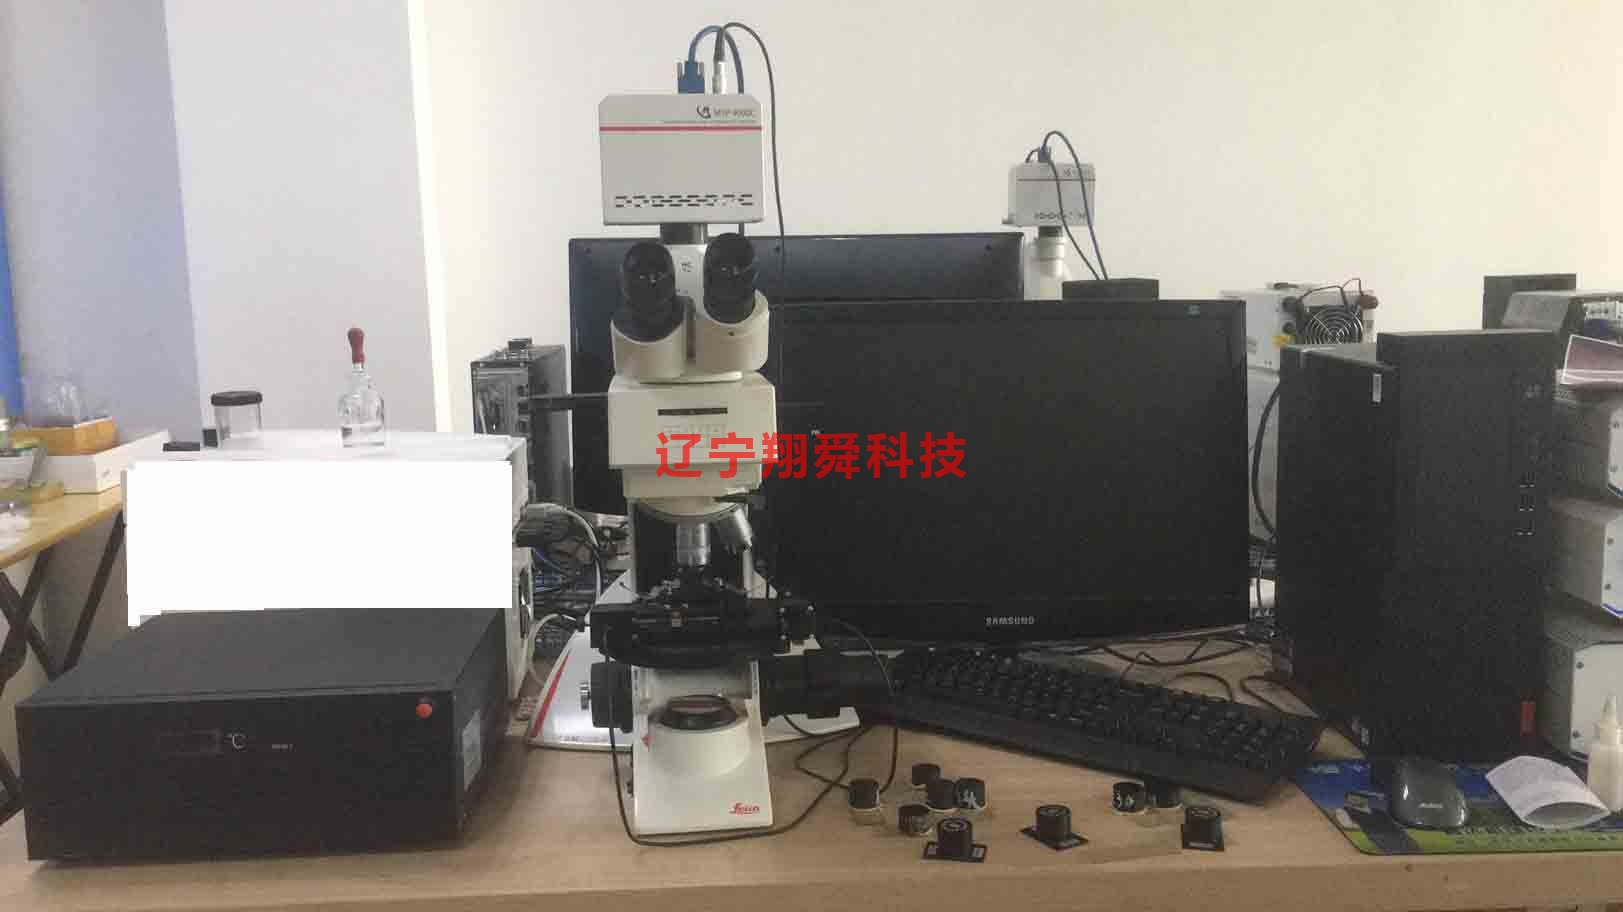 MSP 9000a automatic intelligent coal petrographic analysis system